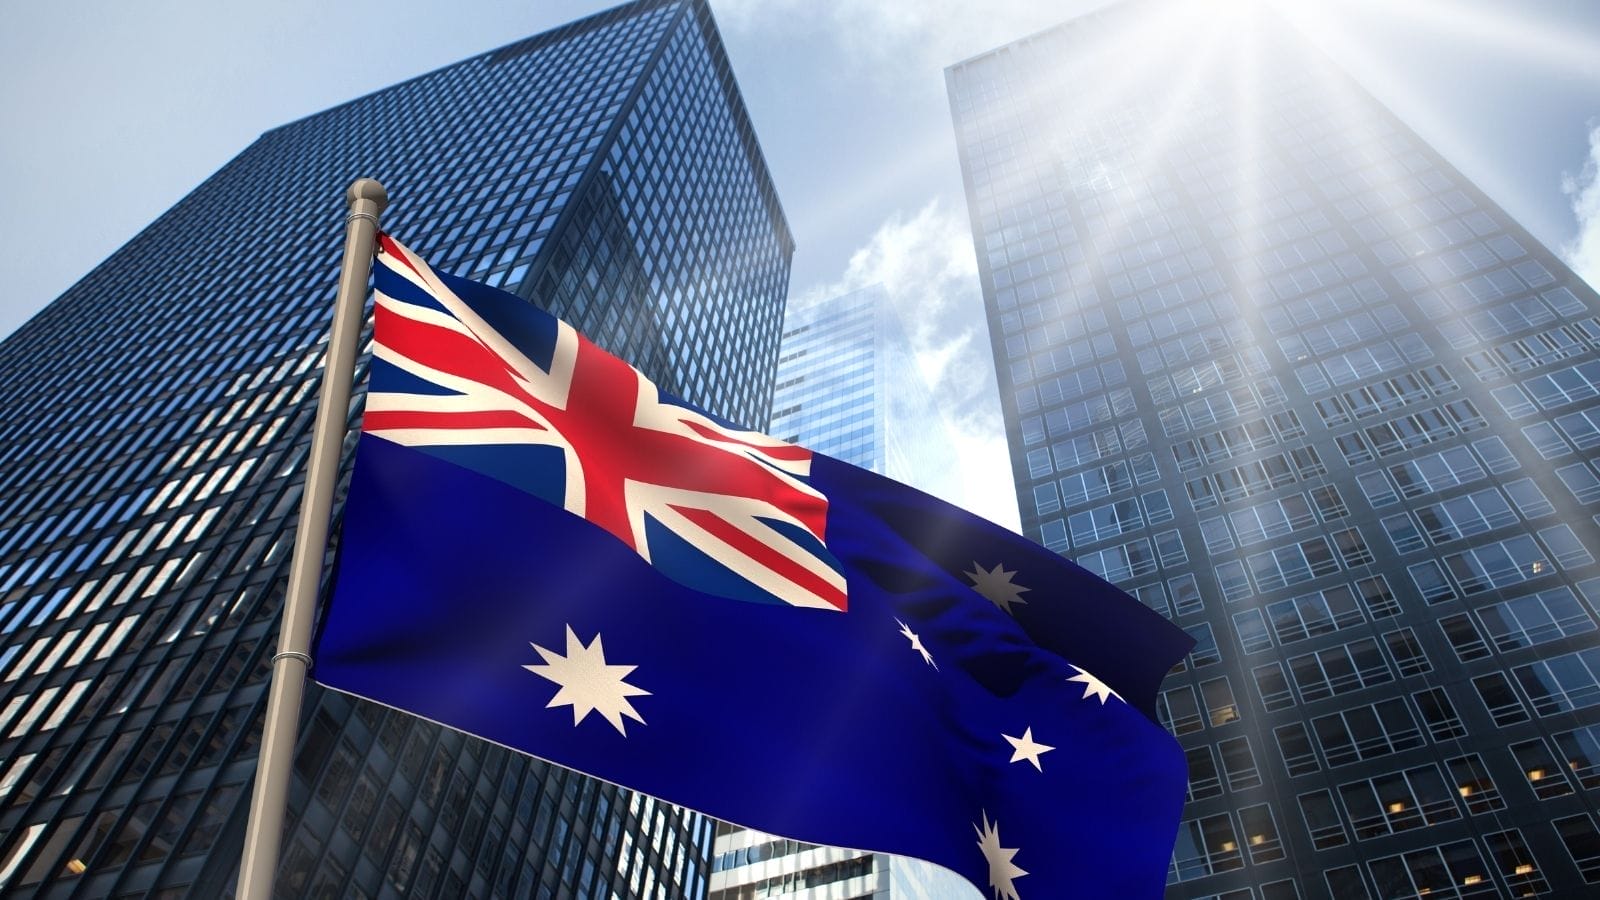 Two glass skyscrapers reaching a clear blue sky. In front of them, the Australian flag.